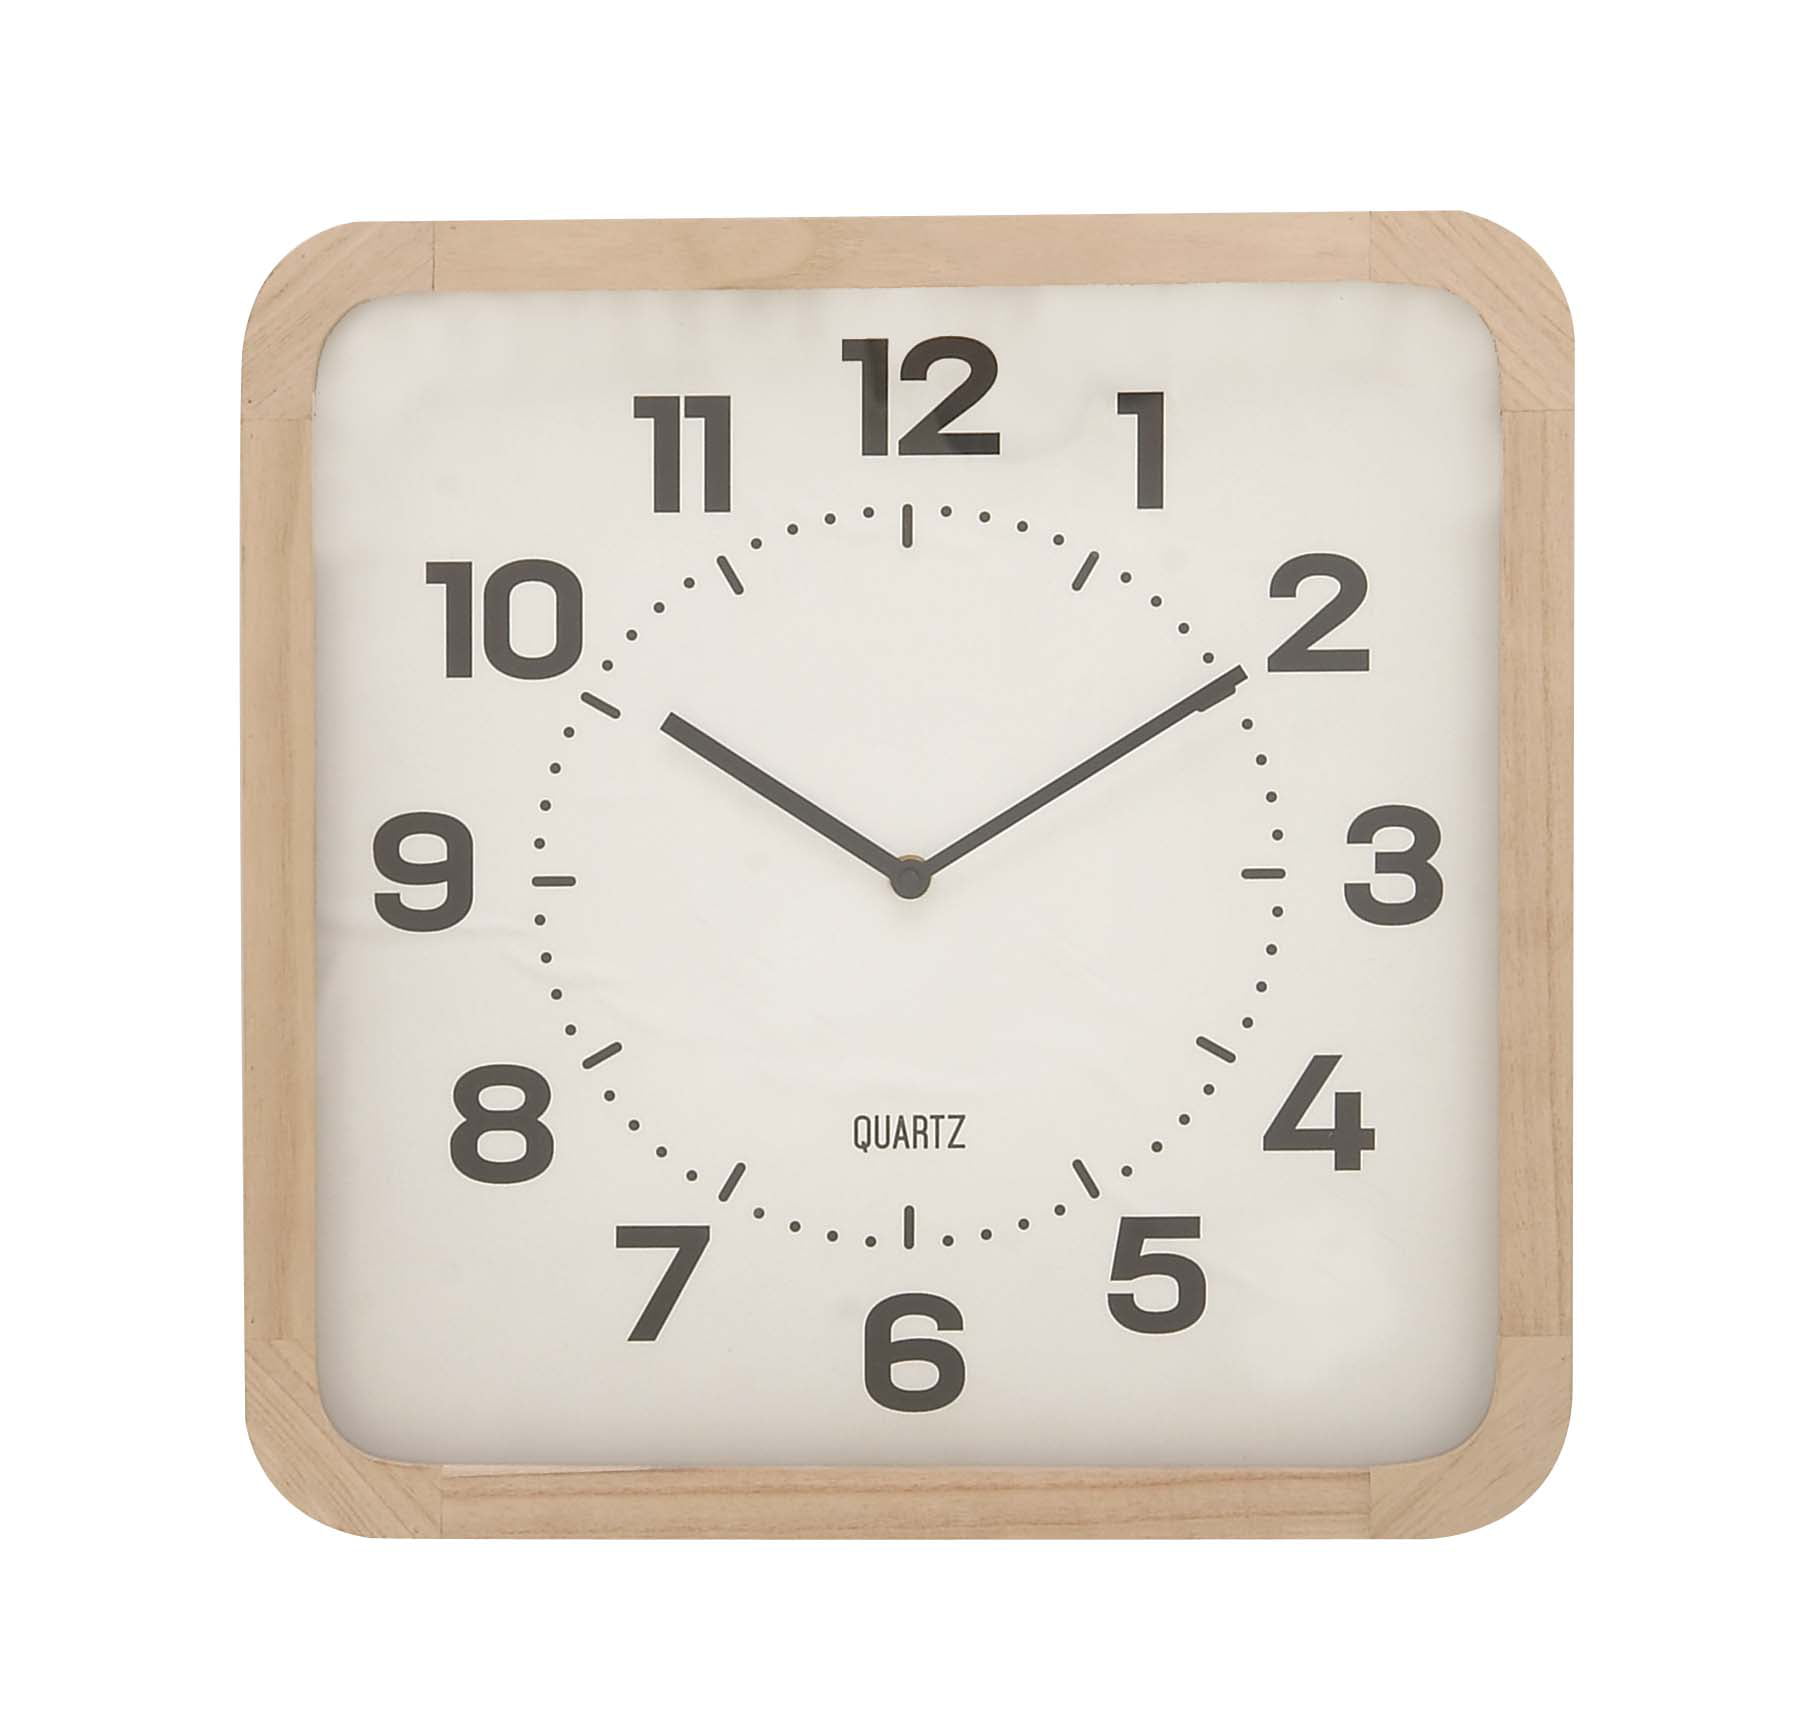 Decmode Contemporary 15 X 15 Inch Square White Wooden Wall Clock, White